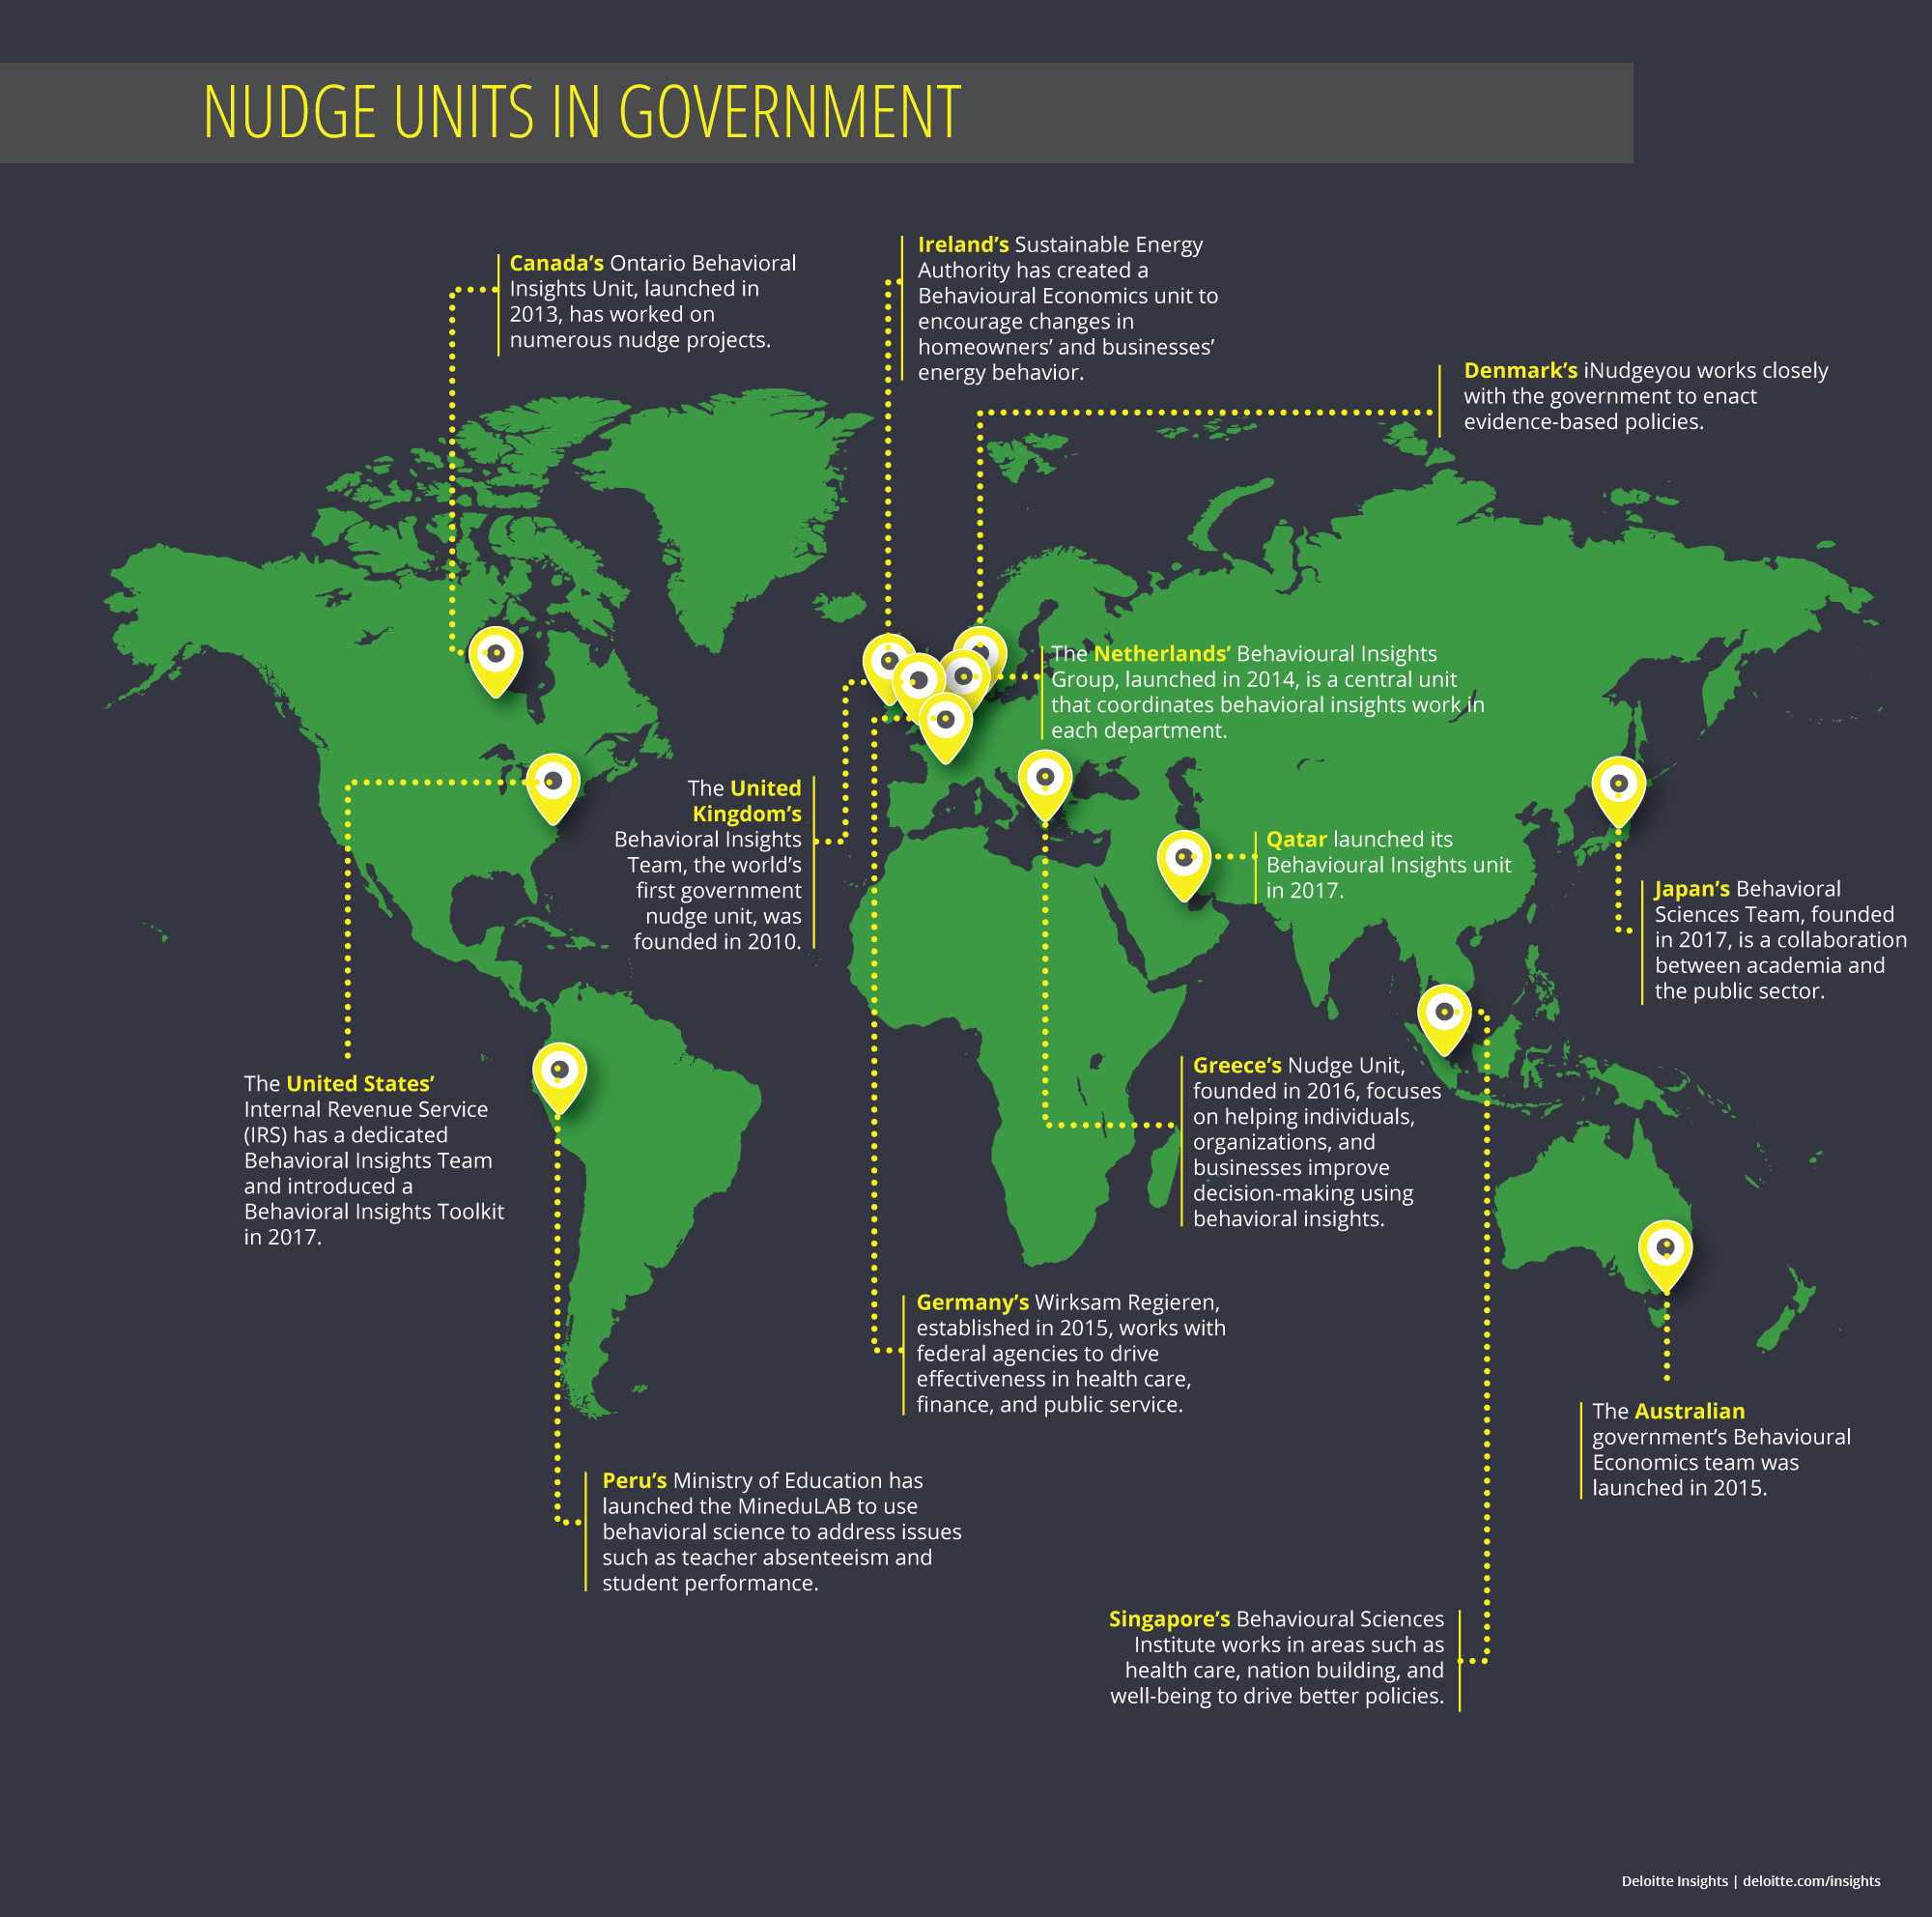 Nudge units in governments